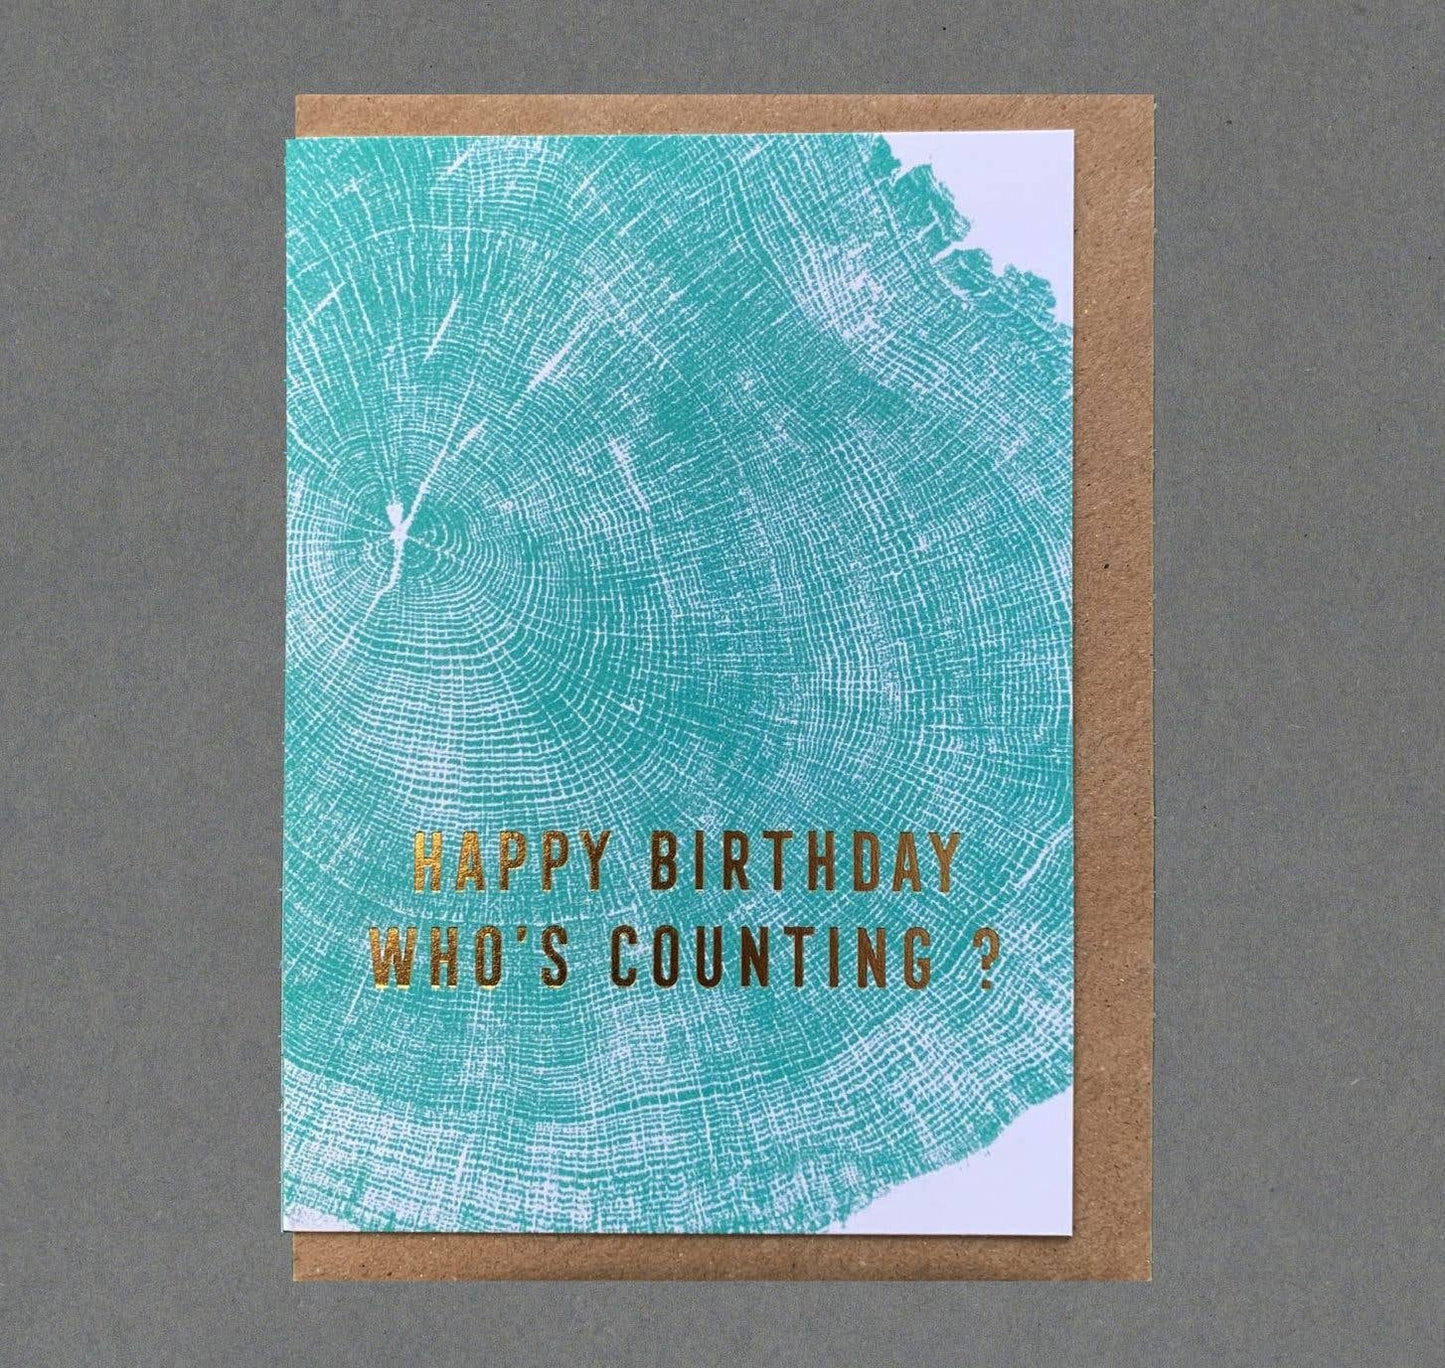 Happy Birthday, Who’s Counting. Gold Foil Greeting Card: With cello